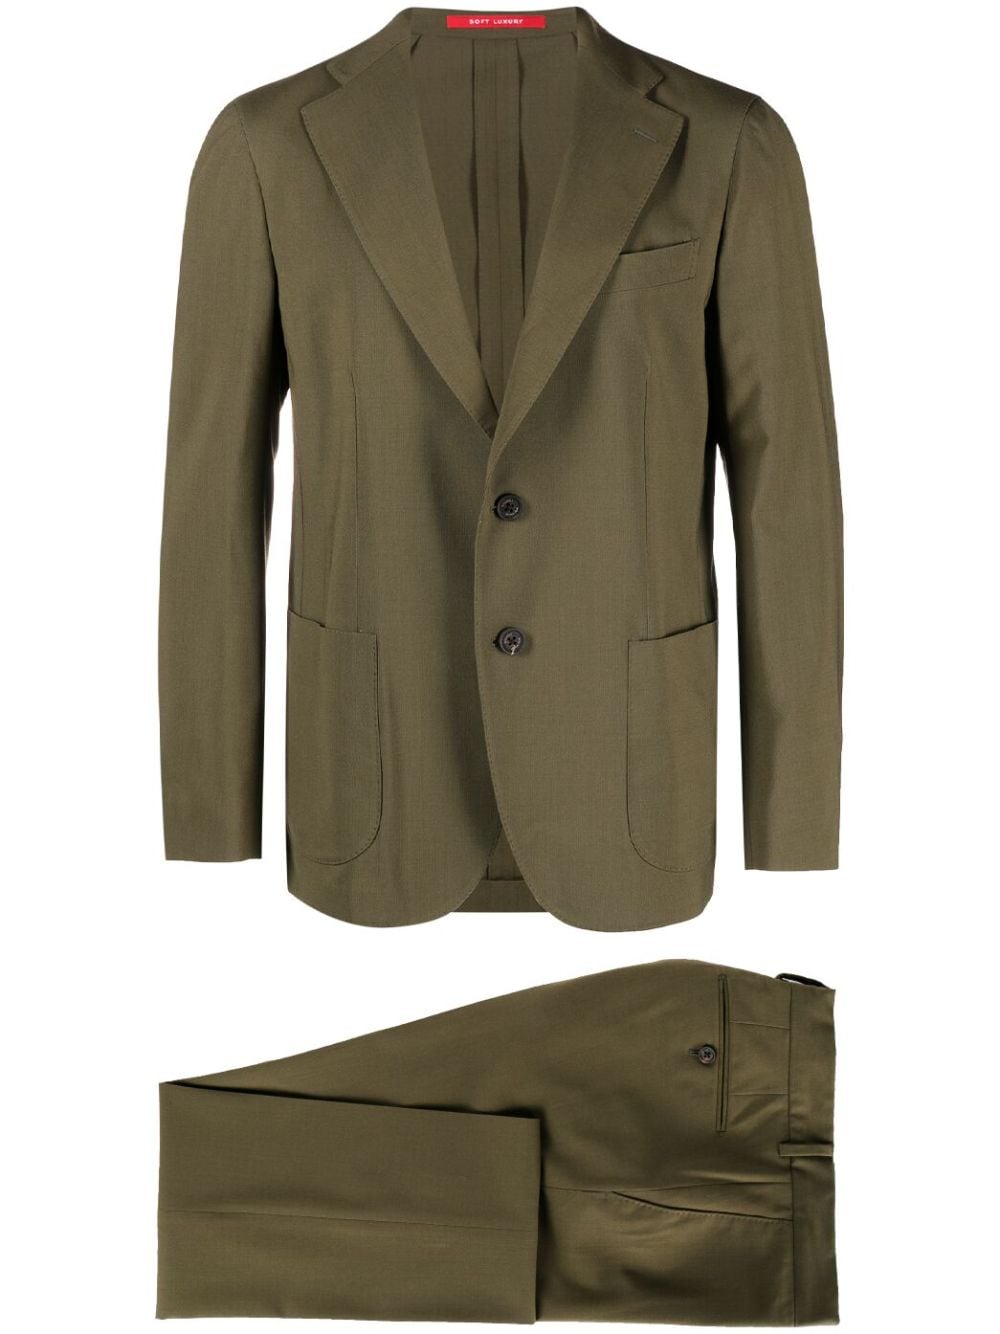 IBLA - Tailored single-breasted suit